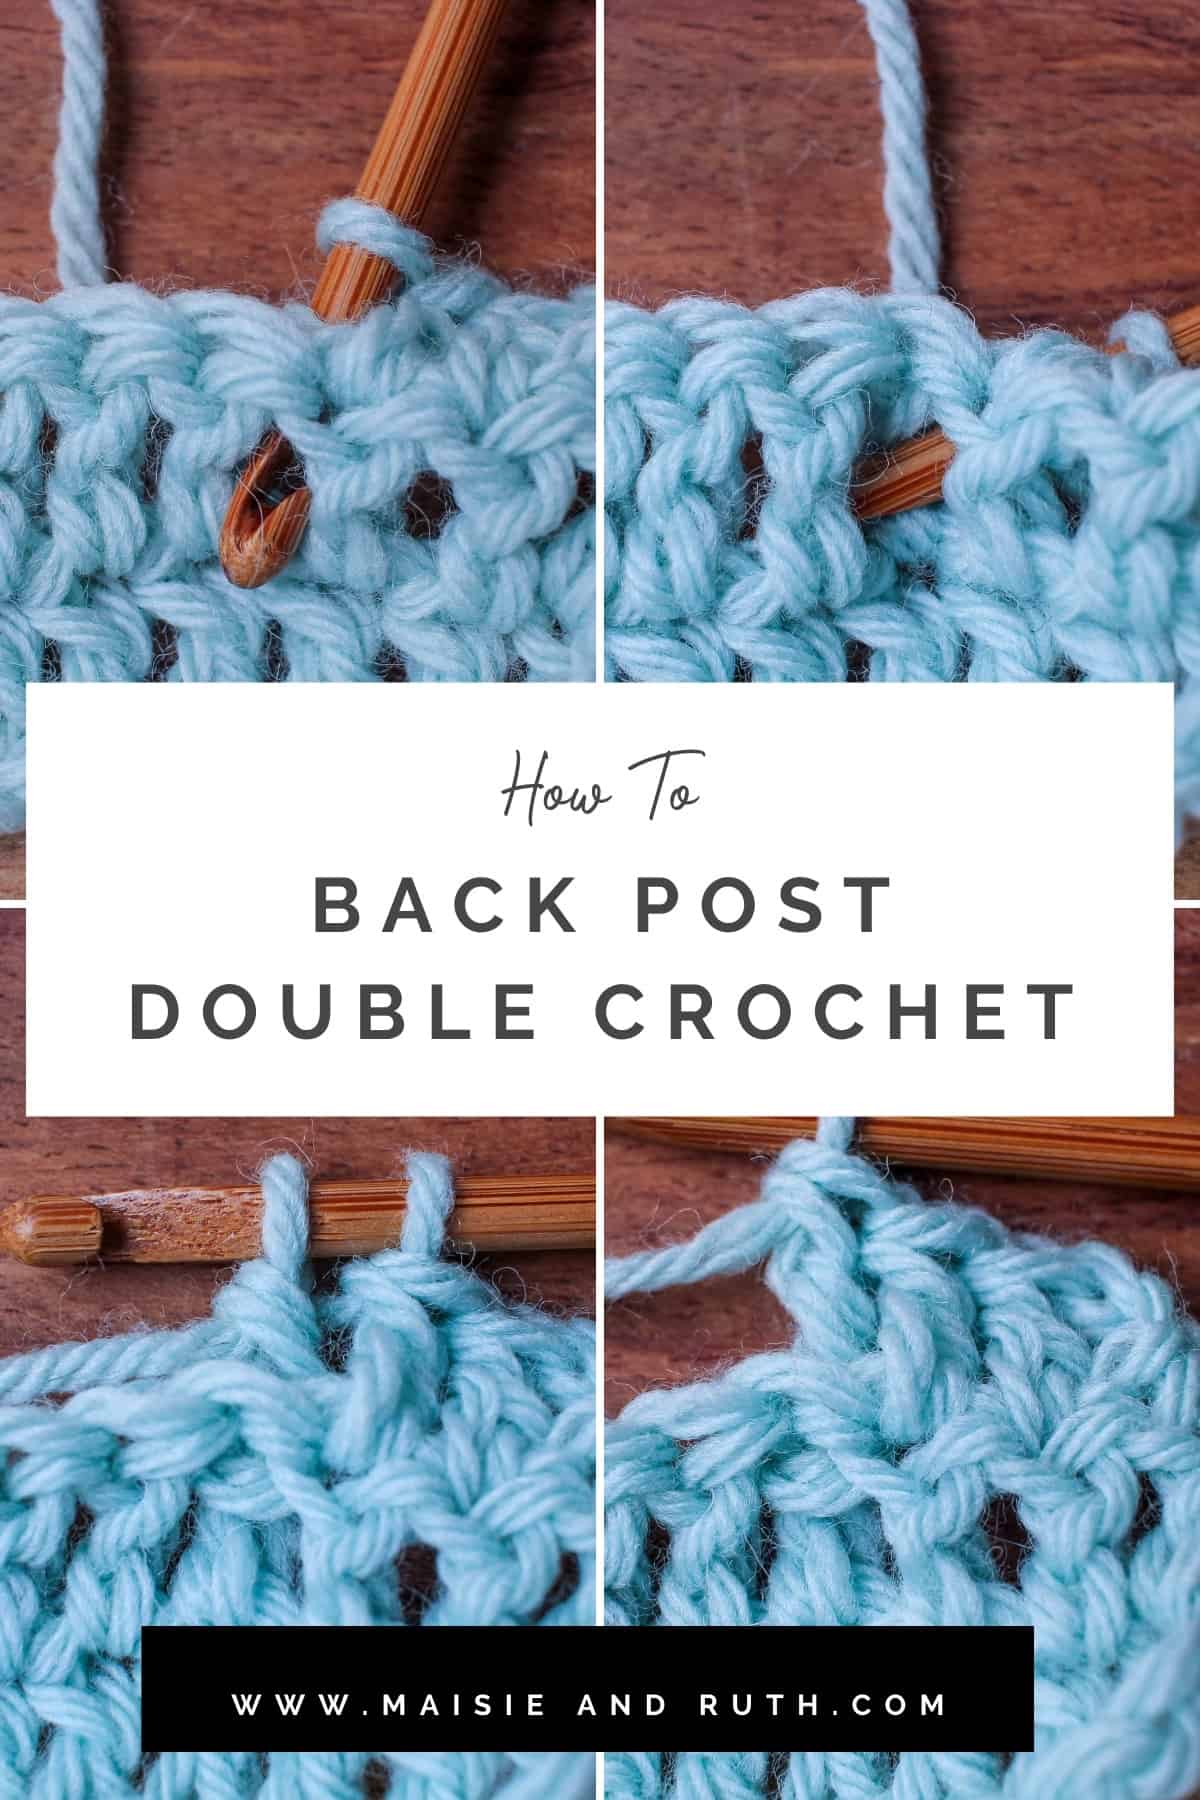 The Back Post Double Crochet (Step-by-Step Tutorial) - Maisie and Ruth